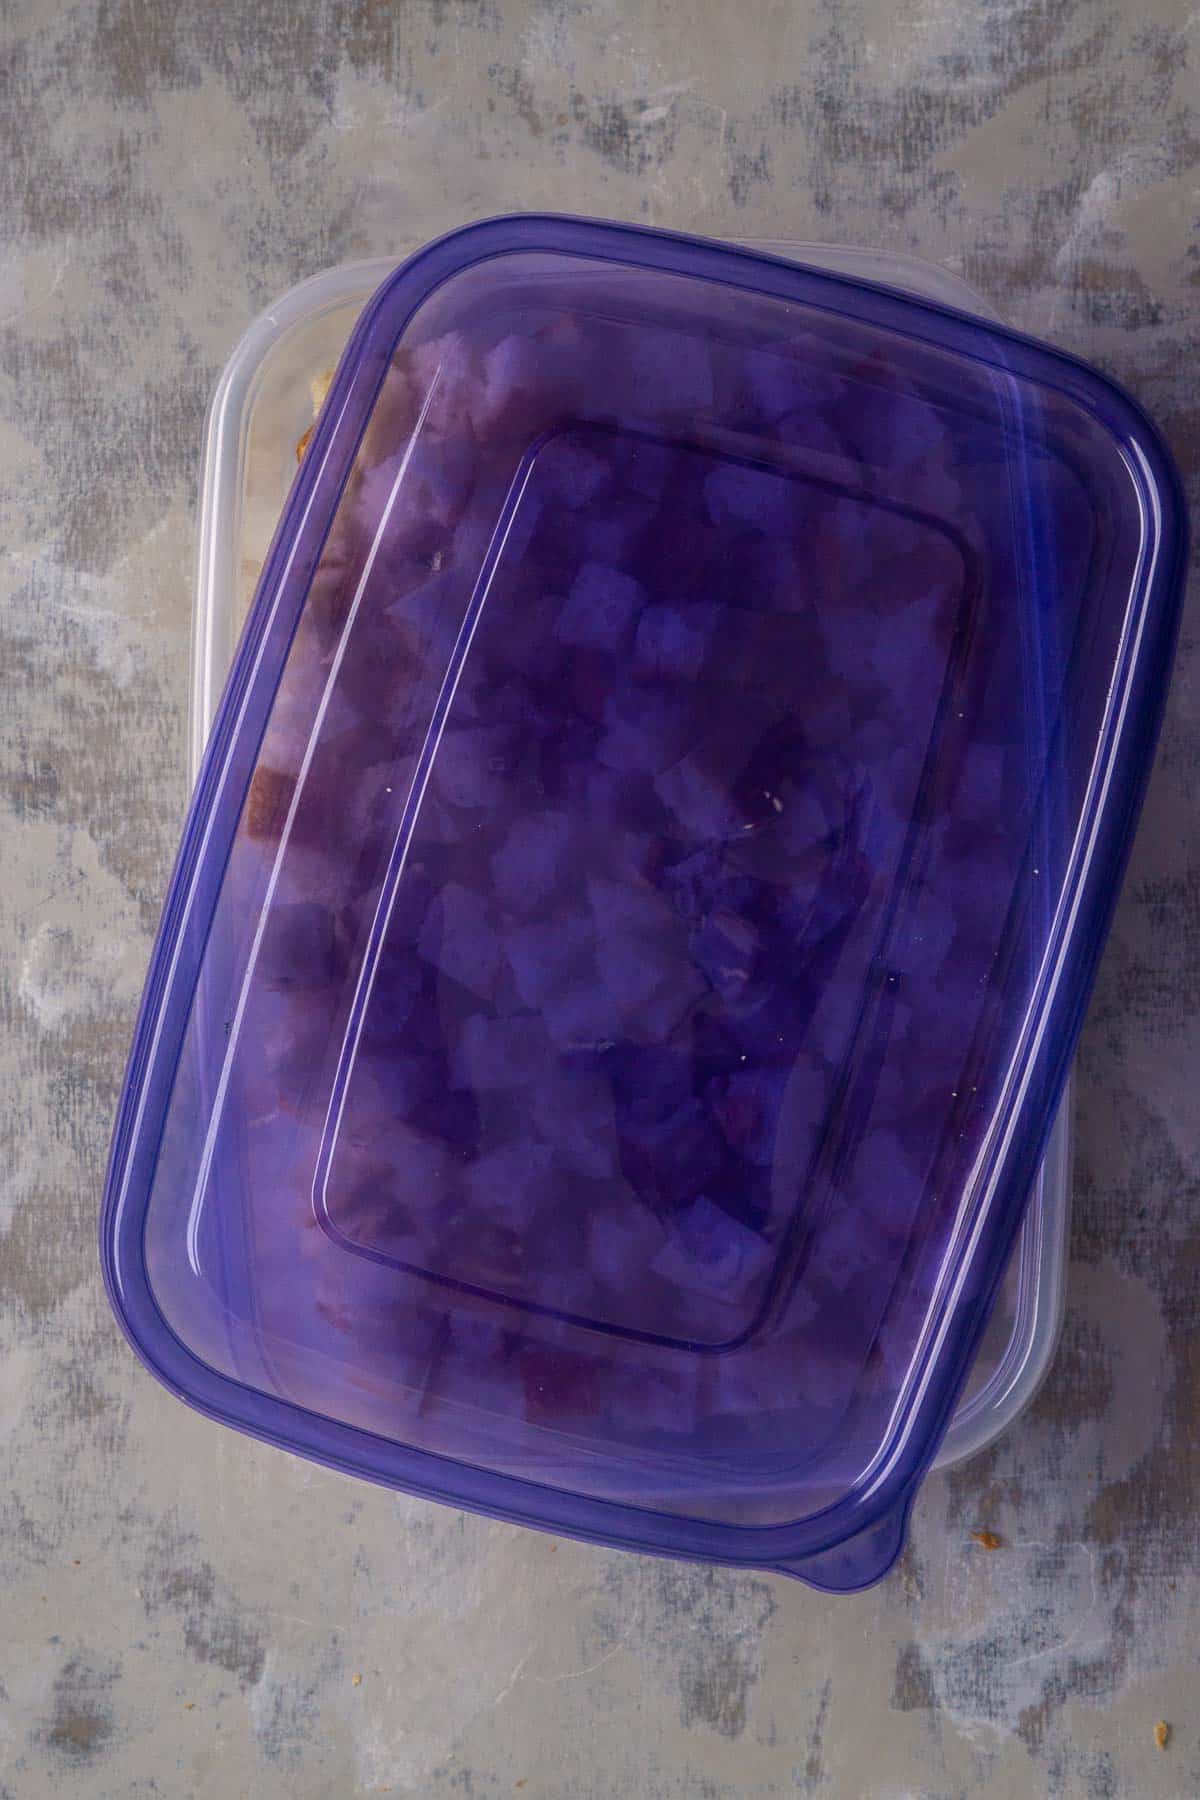 bread cubes in plastic storage container with loose-fitting lid